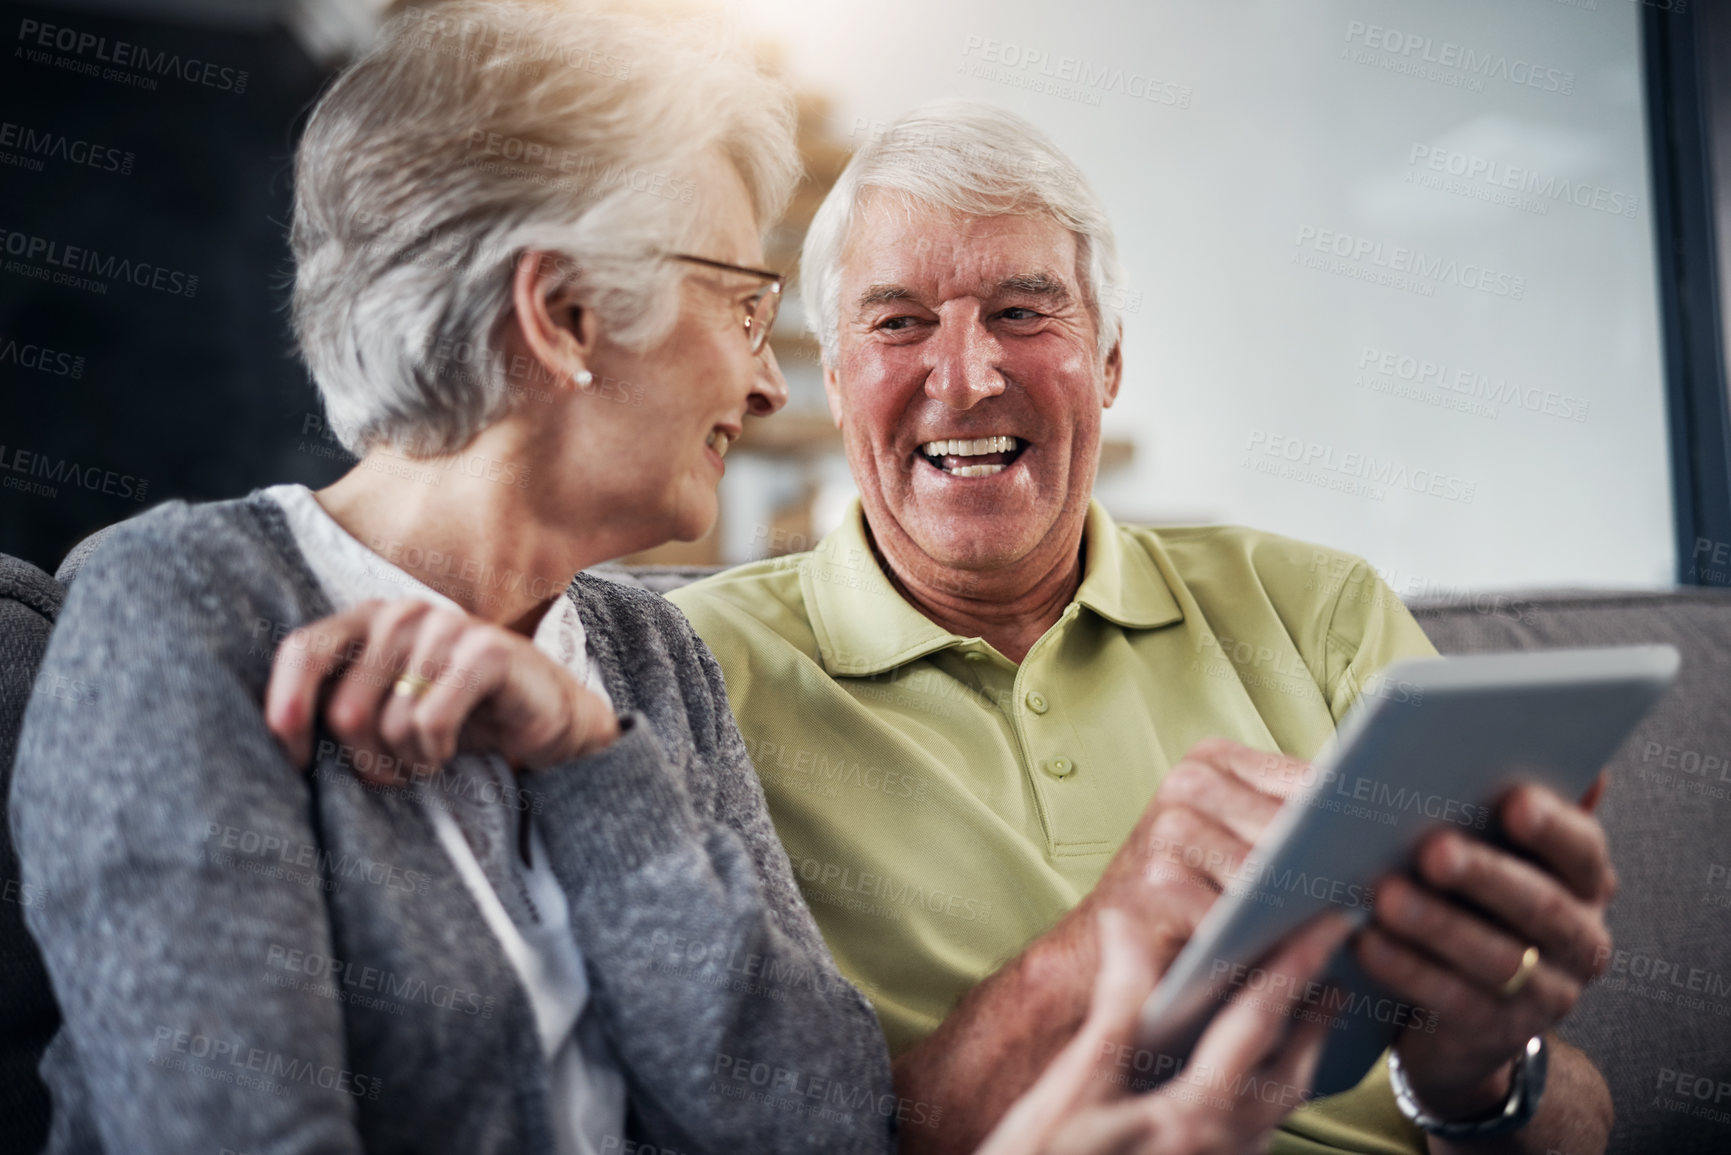 Buy stock photo Shot of a senior couple using a digital tablet together on the sofa at home